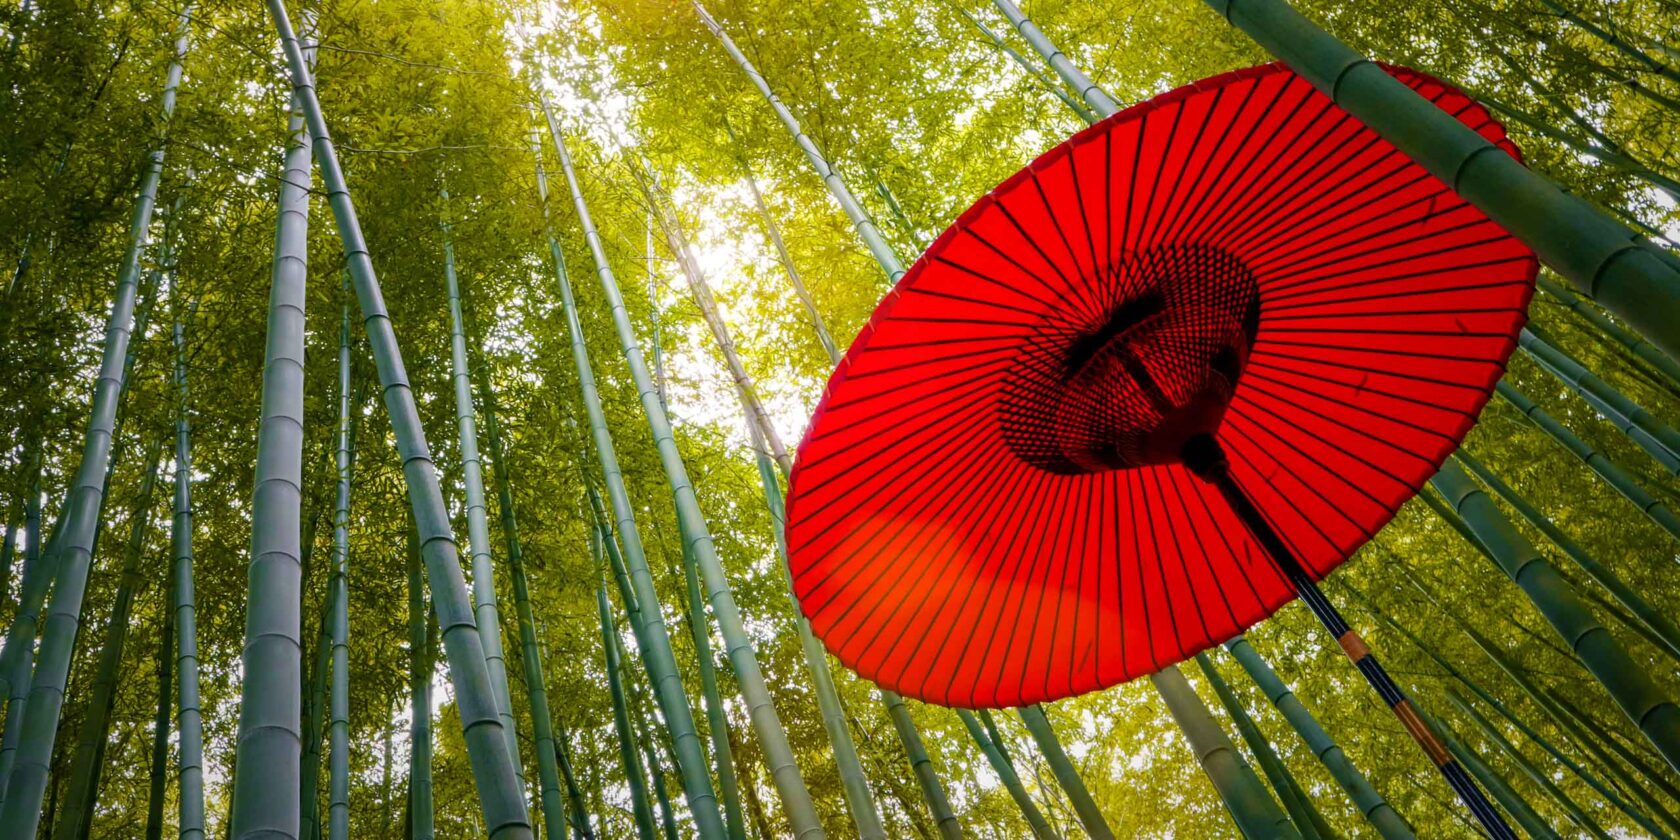 A red parasol umbrella in a bamboo forest.